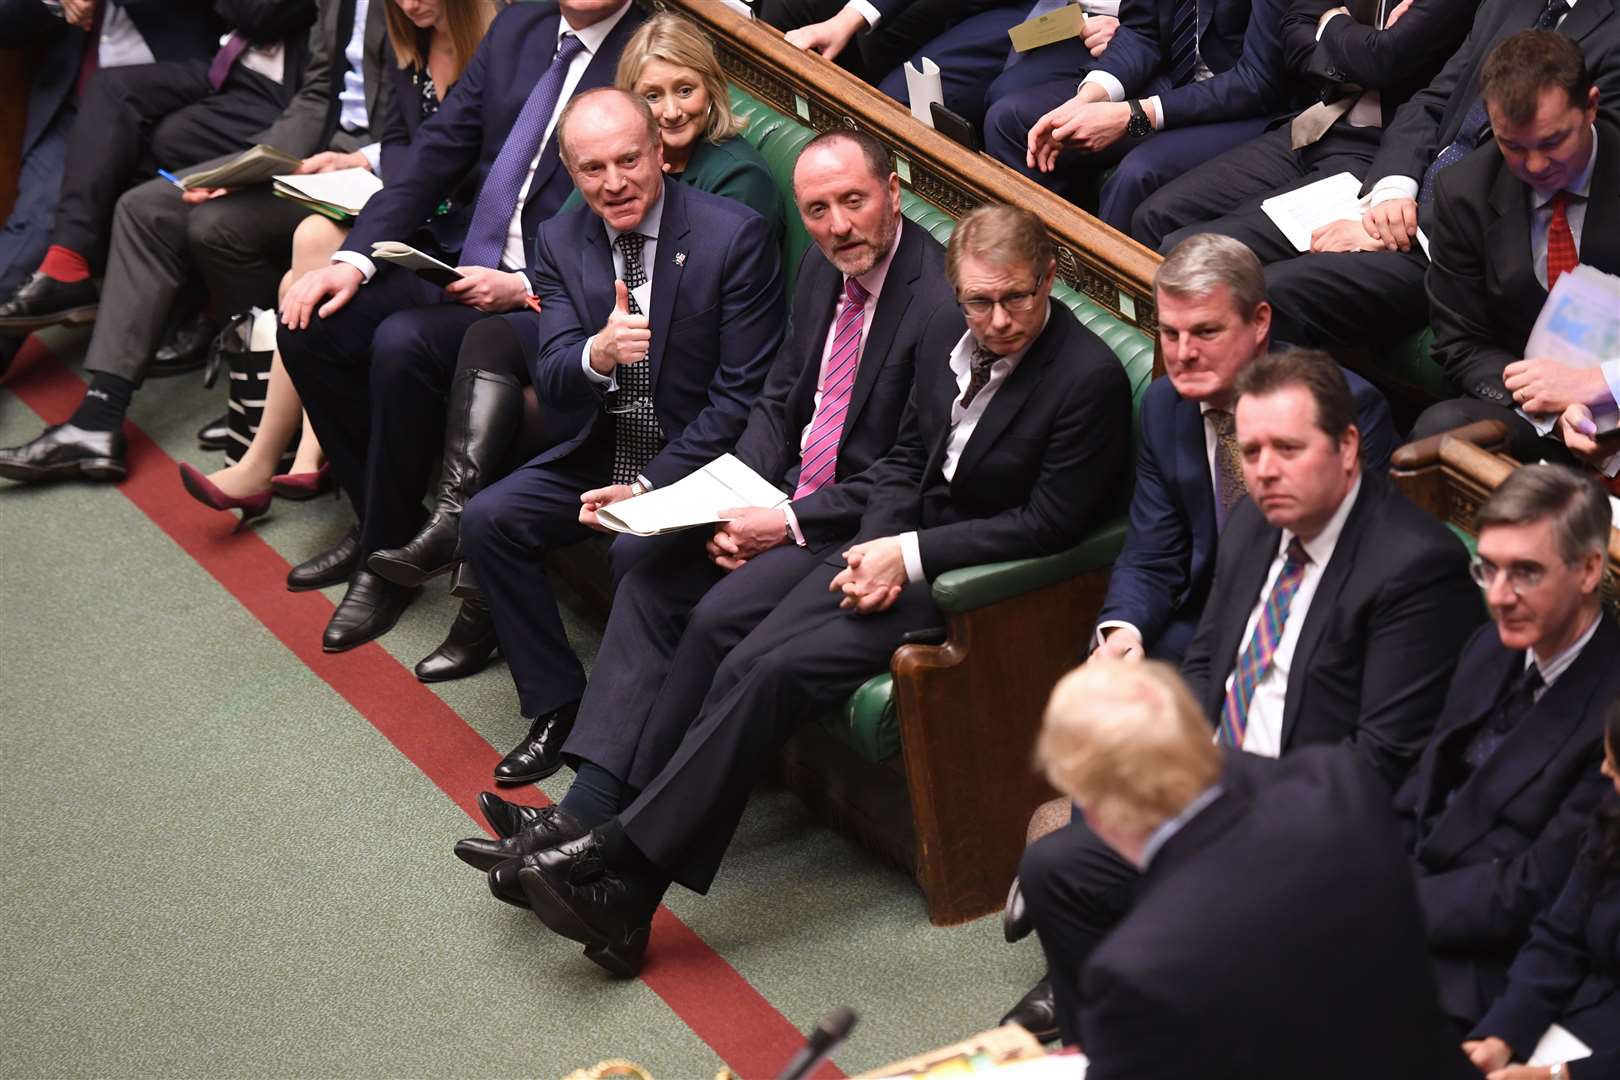 Marco Longhi giving a thumbs up during Prime Minister’s Questions (UK Parliament/Jessica Taylor)